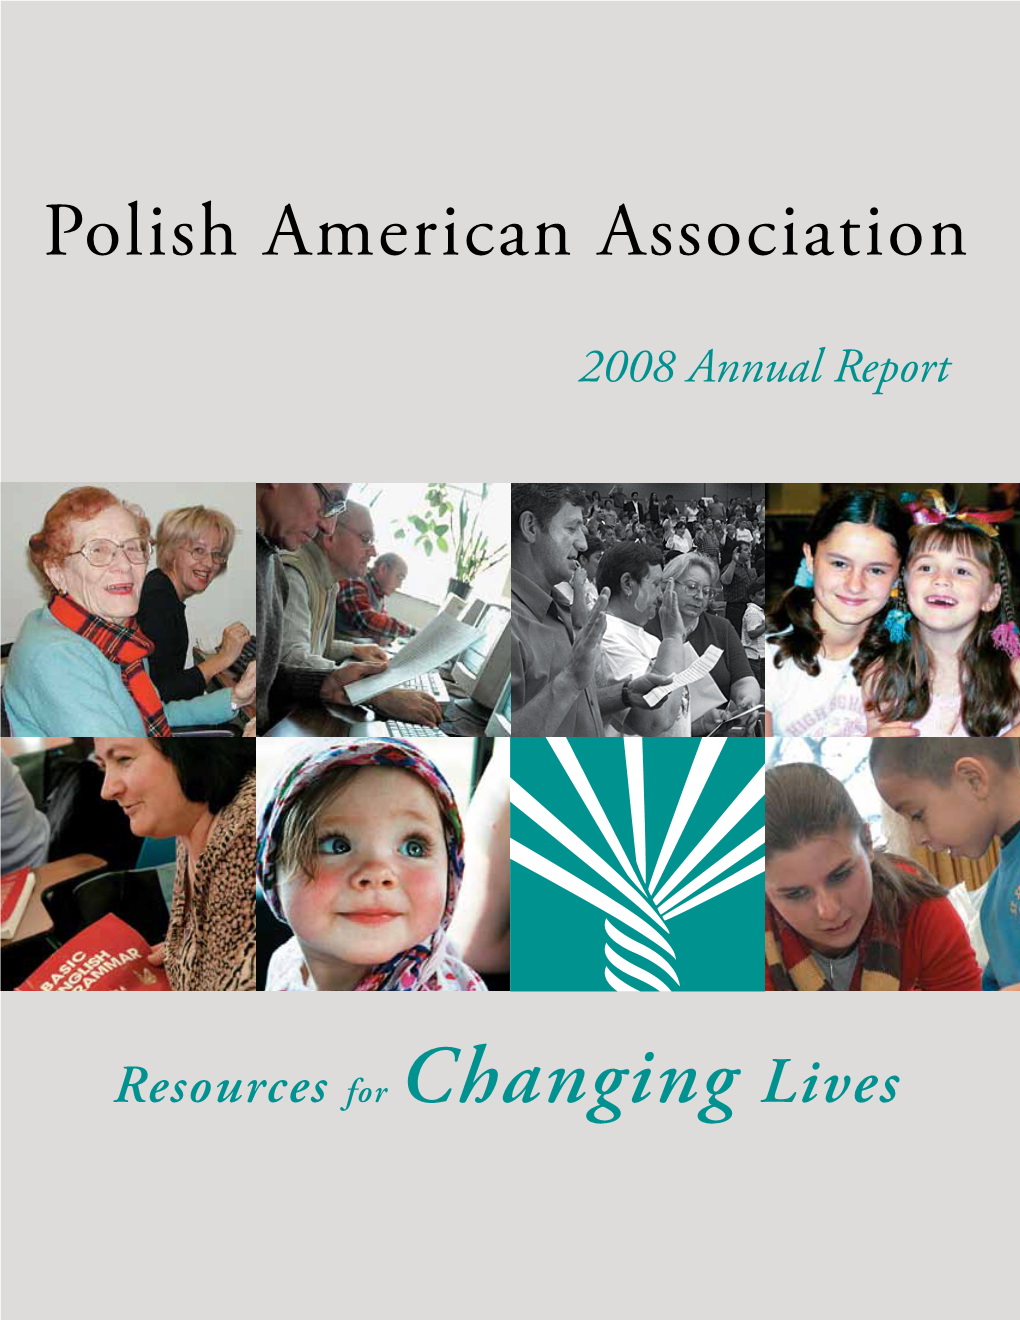 The Mission of the Polish American Association, a Human Service